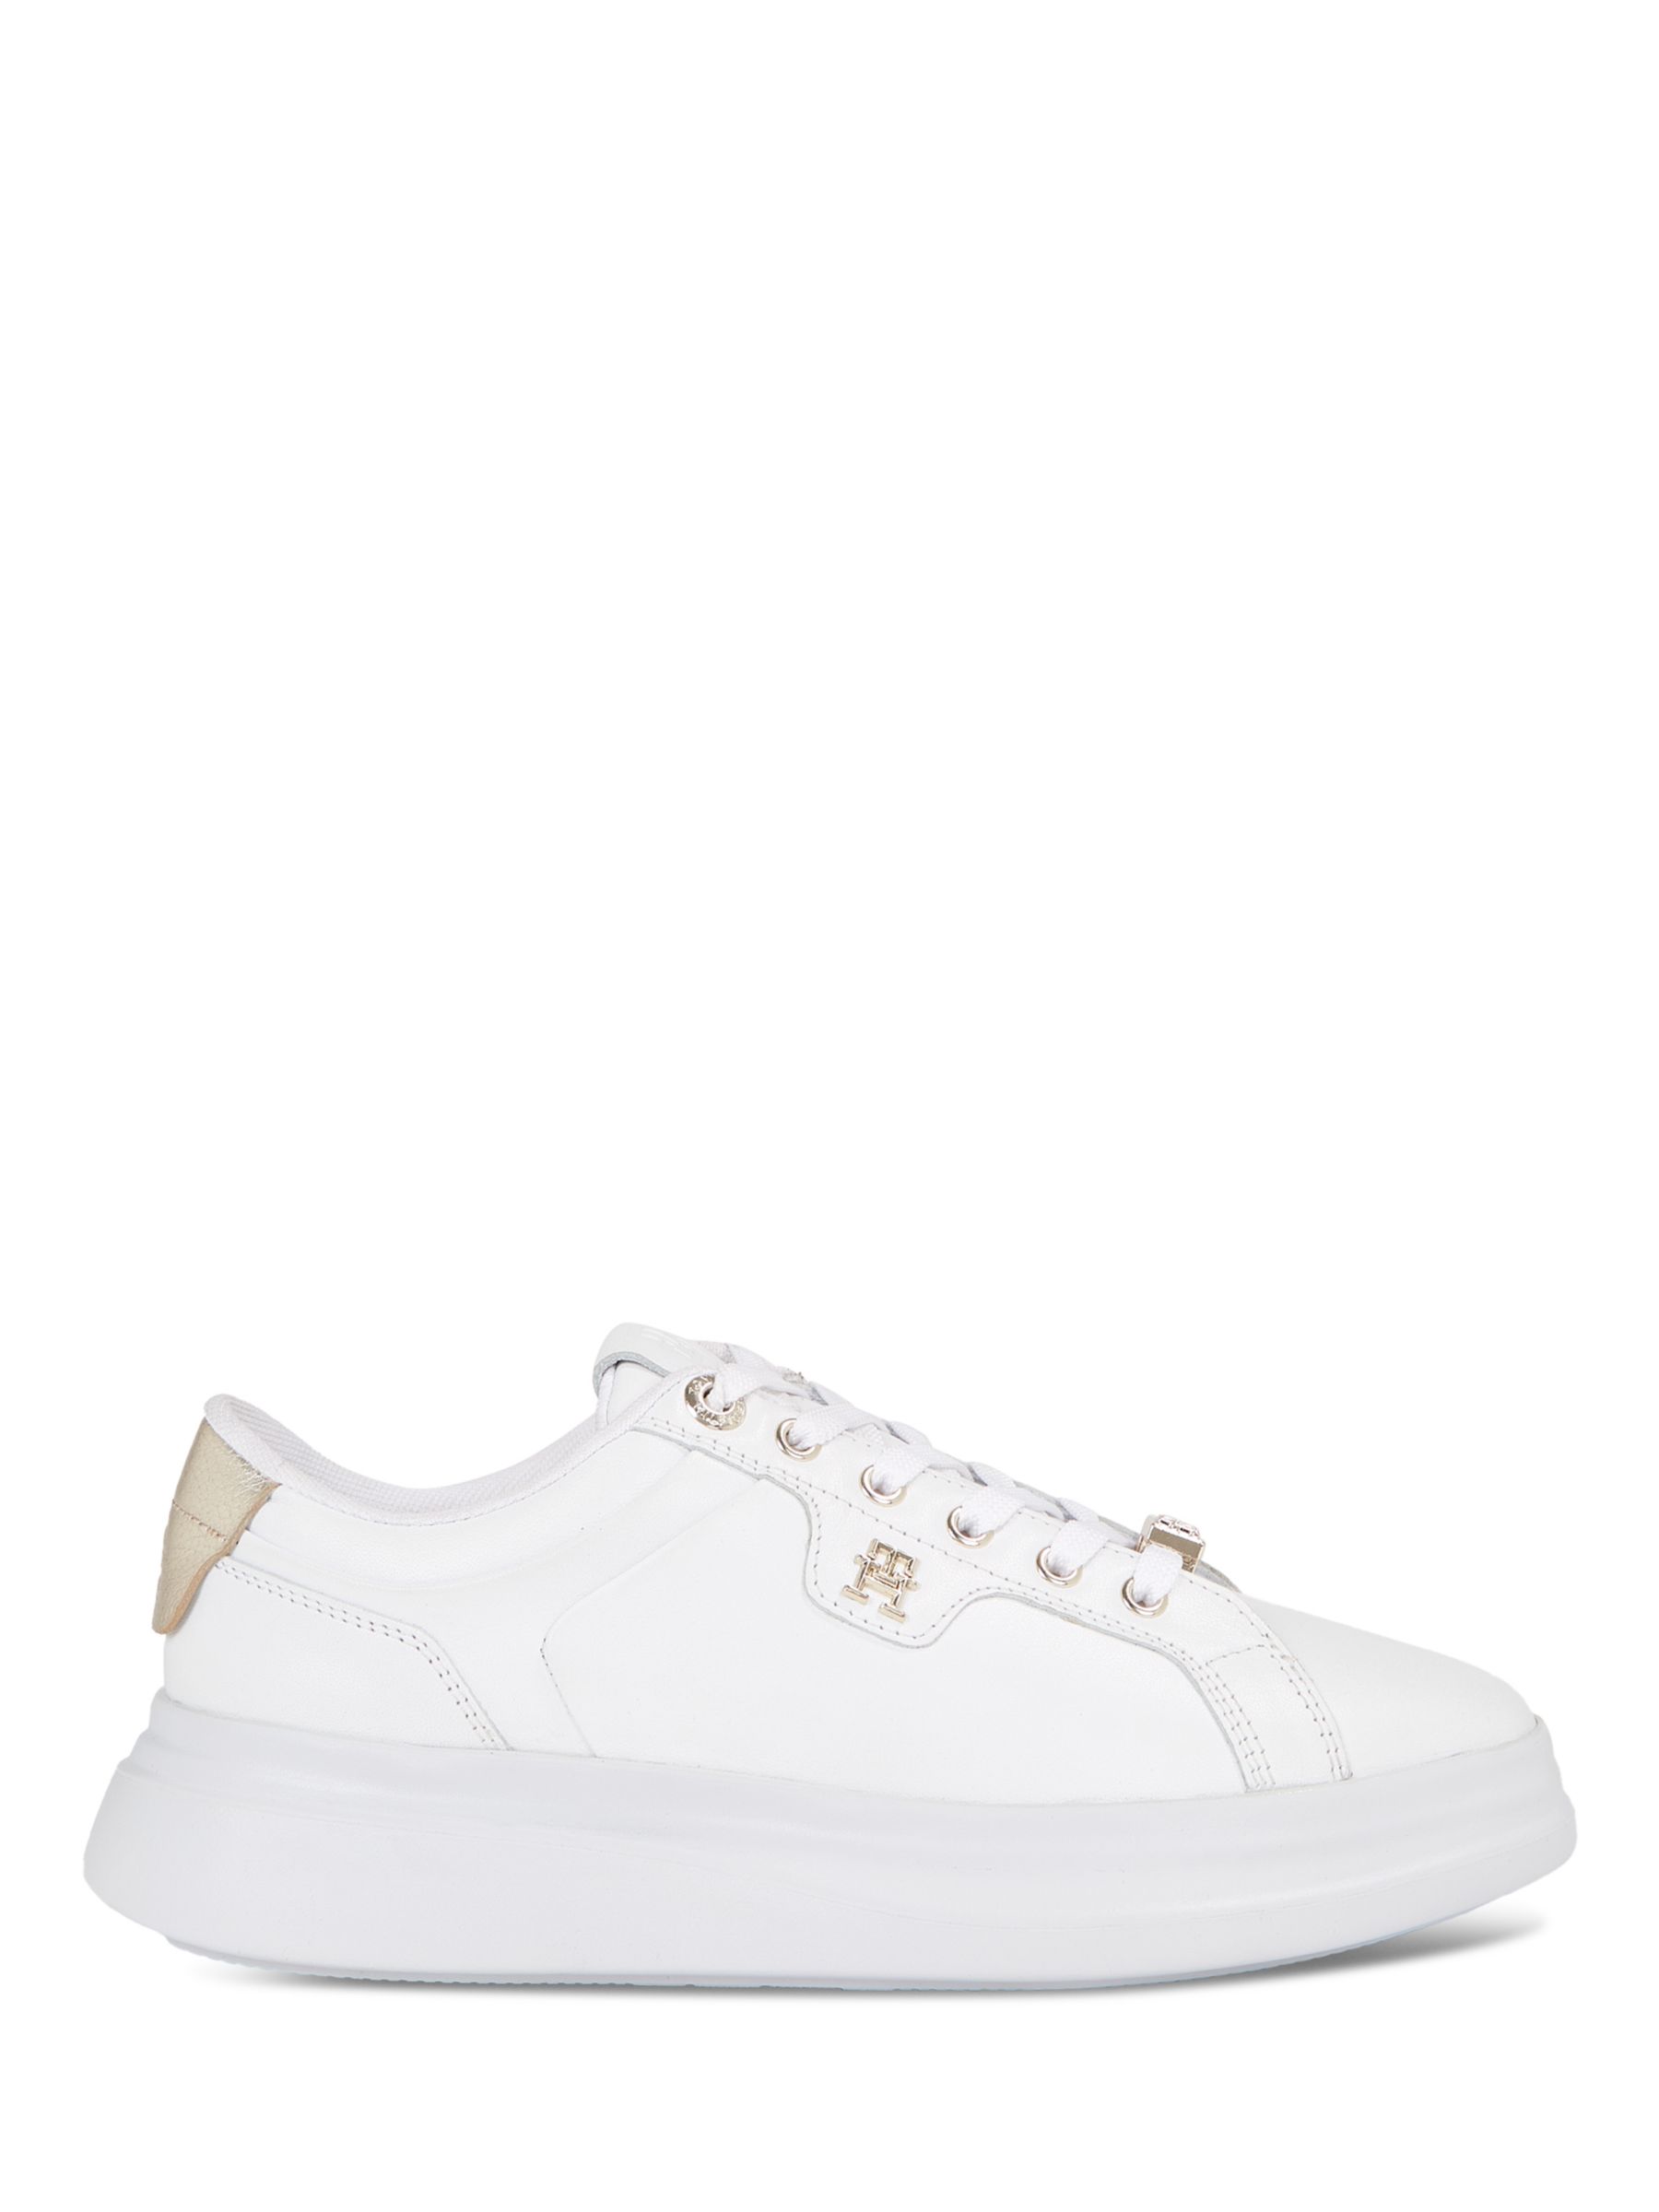 Tommy Hilfiger Leather Lace-Up Flatform Trainers, White/Gold at John ...